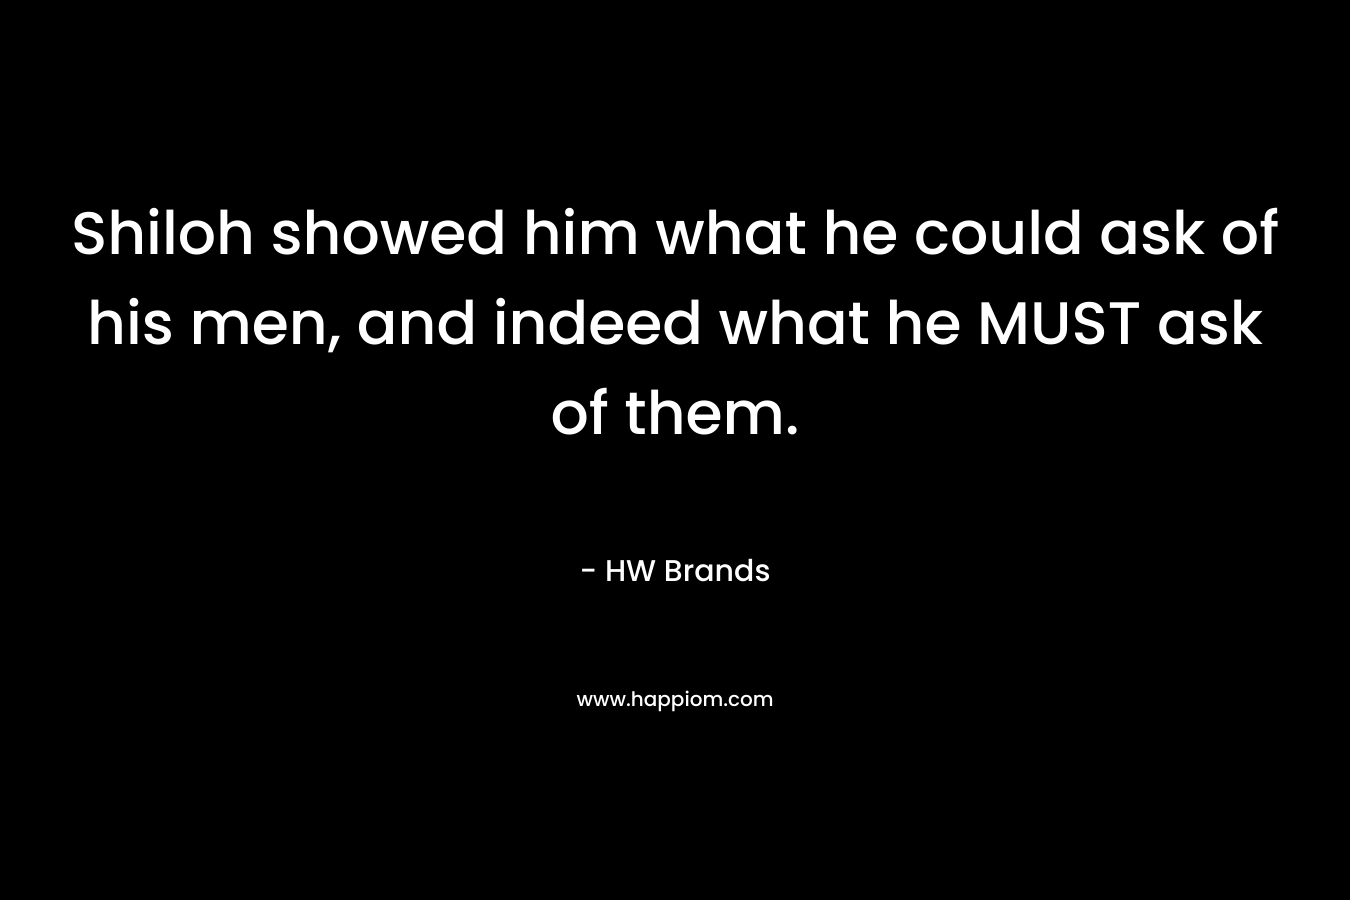 Shiloh showed him what he could ask of his men, and indeed what he MUST ask of them. – HW Brands